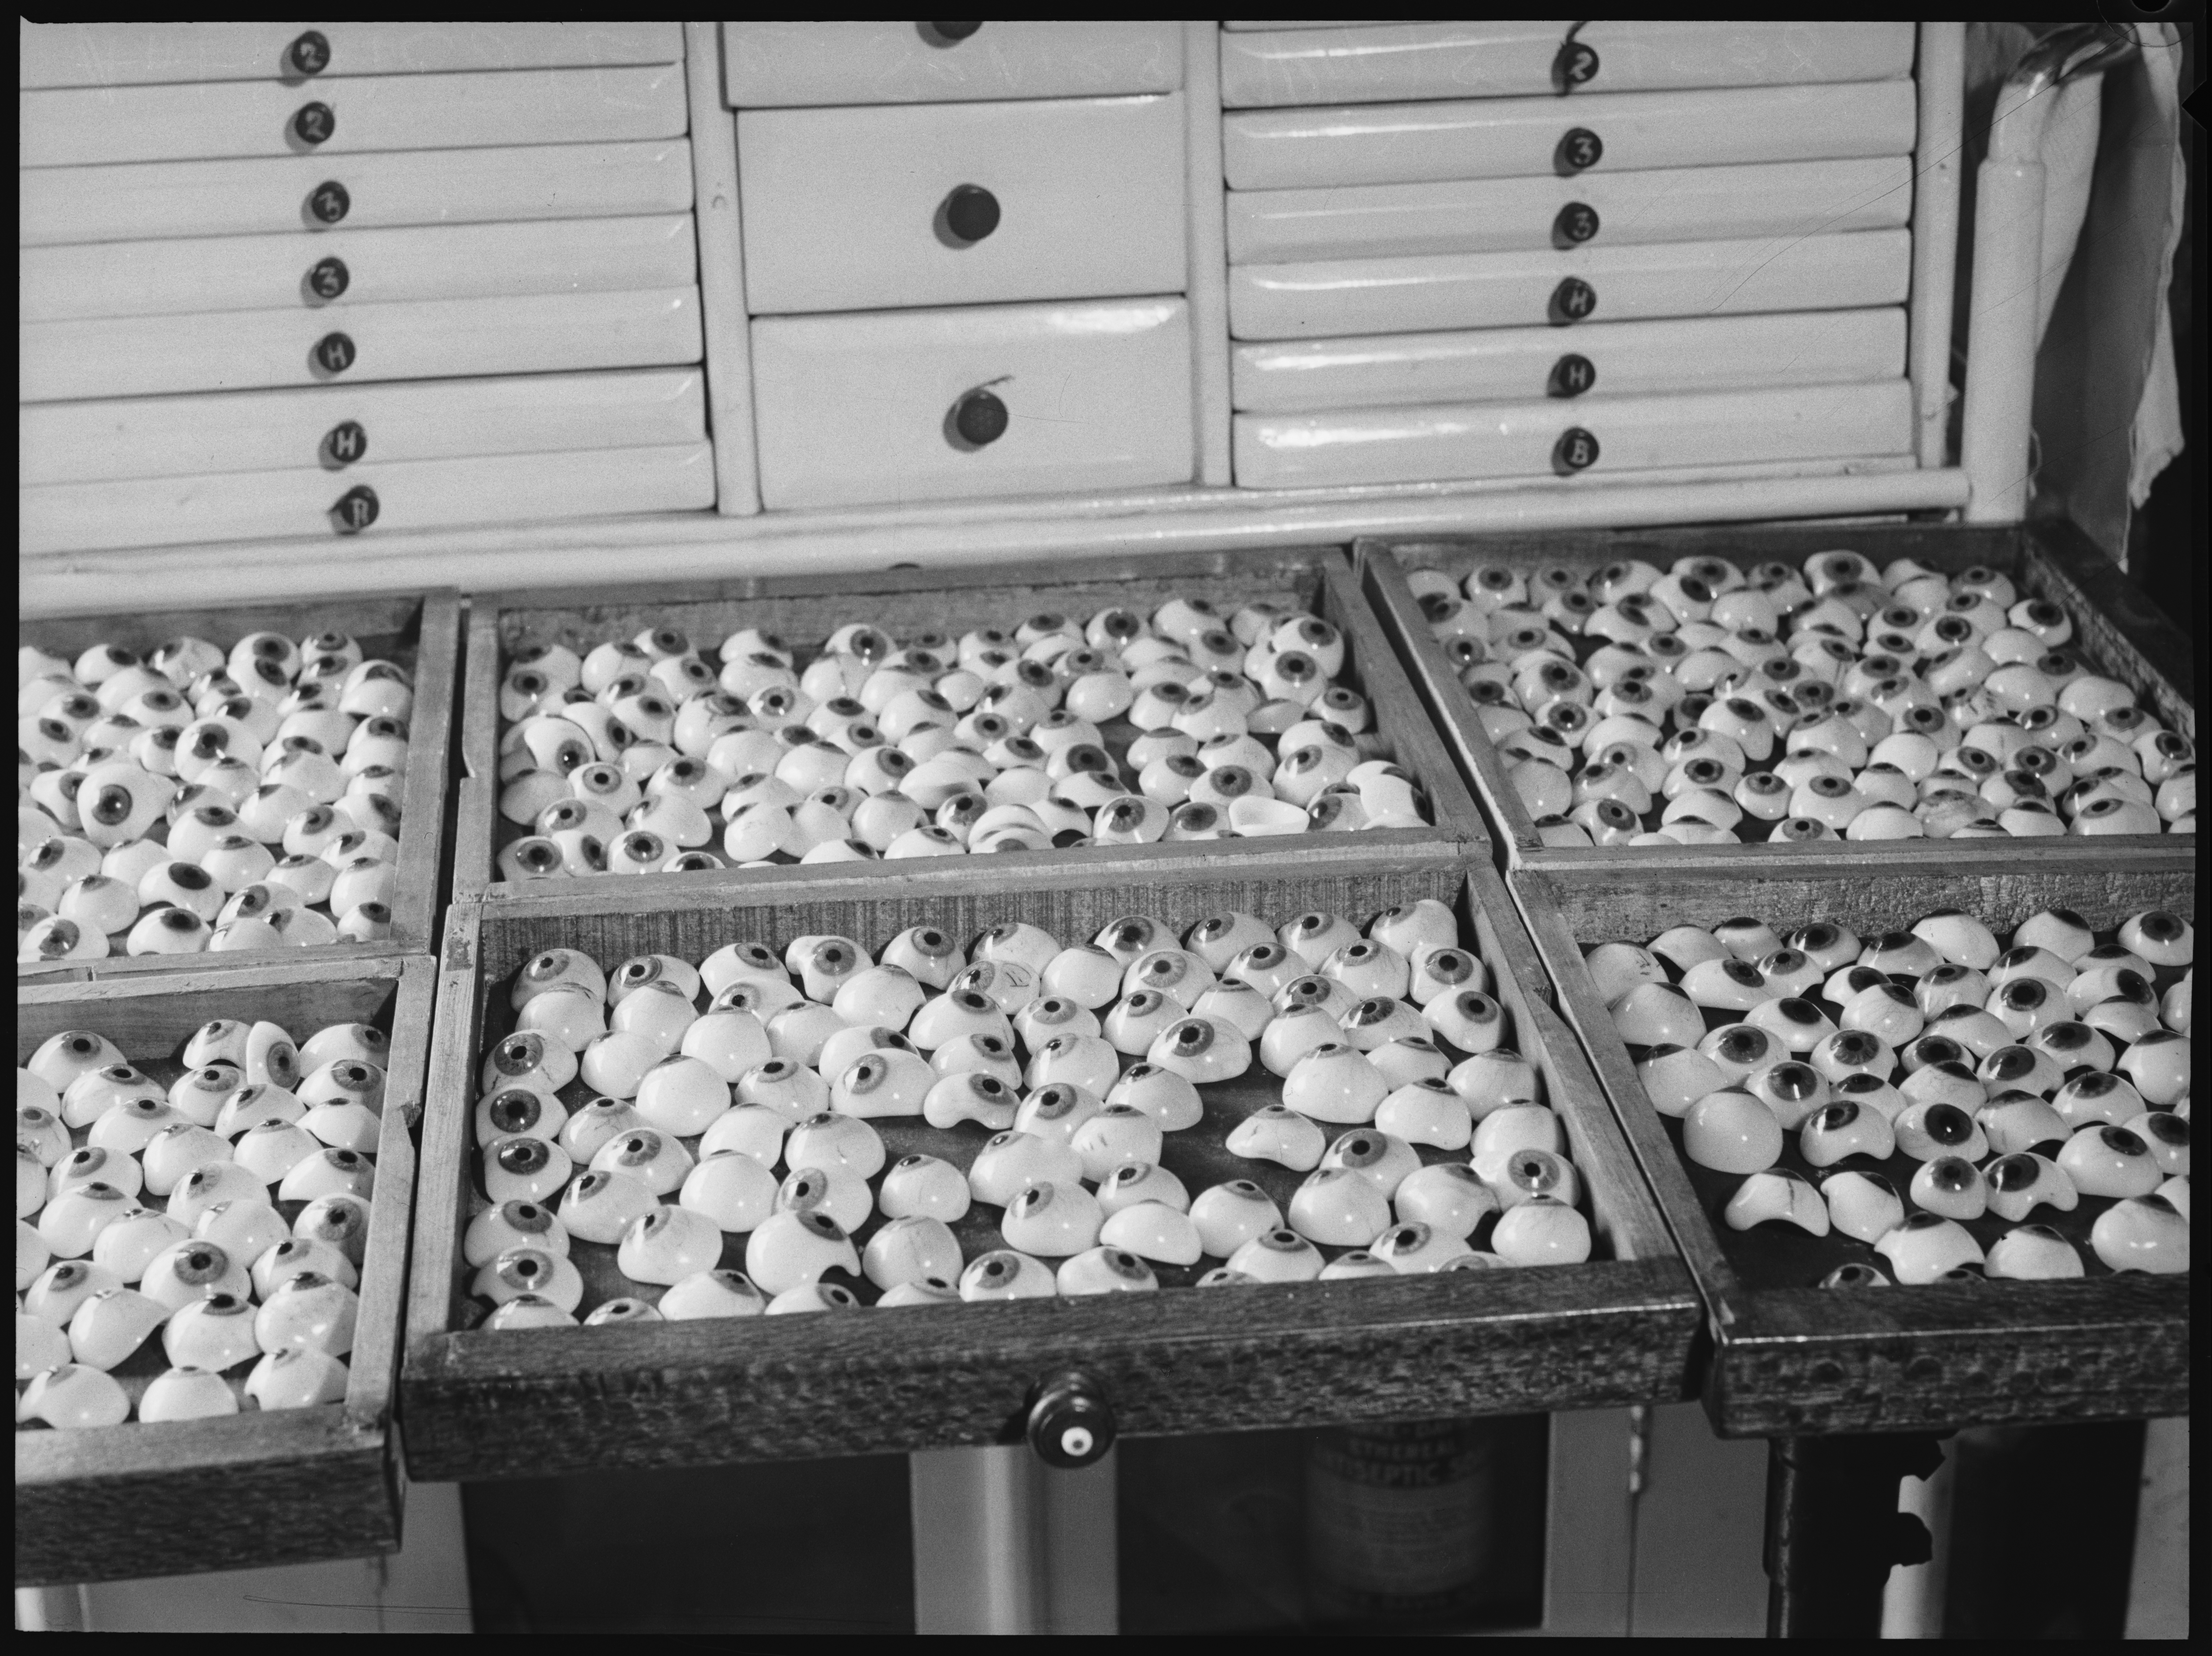 Tray of artificial eyes, 5 April 1938 / photographed by Ivan Ives